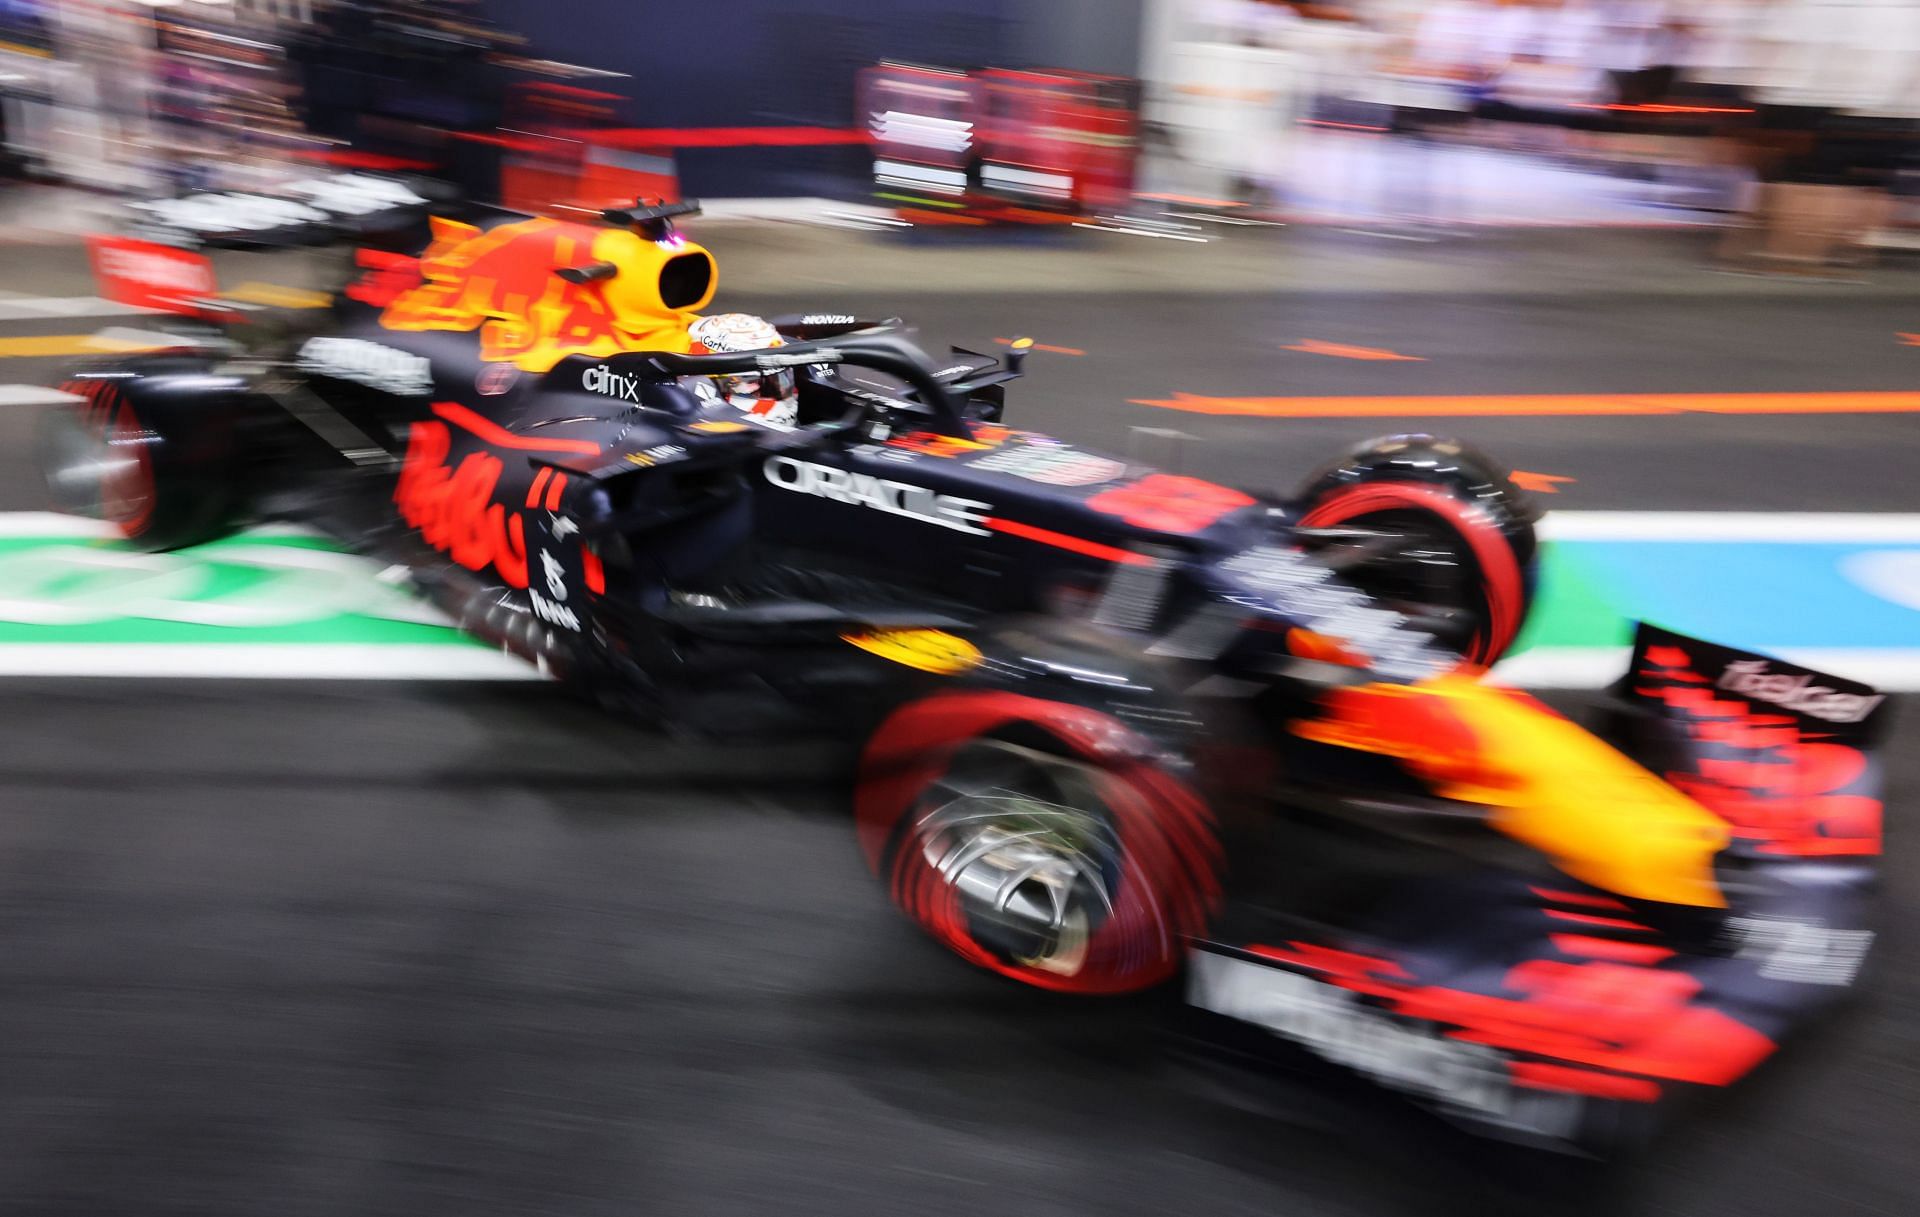 Max Verstappen of Red Bull Racing leaves his garage ahead of the qualifying for the Saudi Arabian Grand Prix